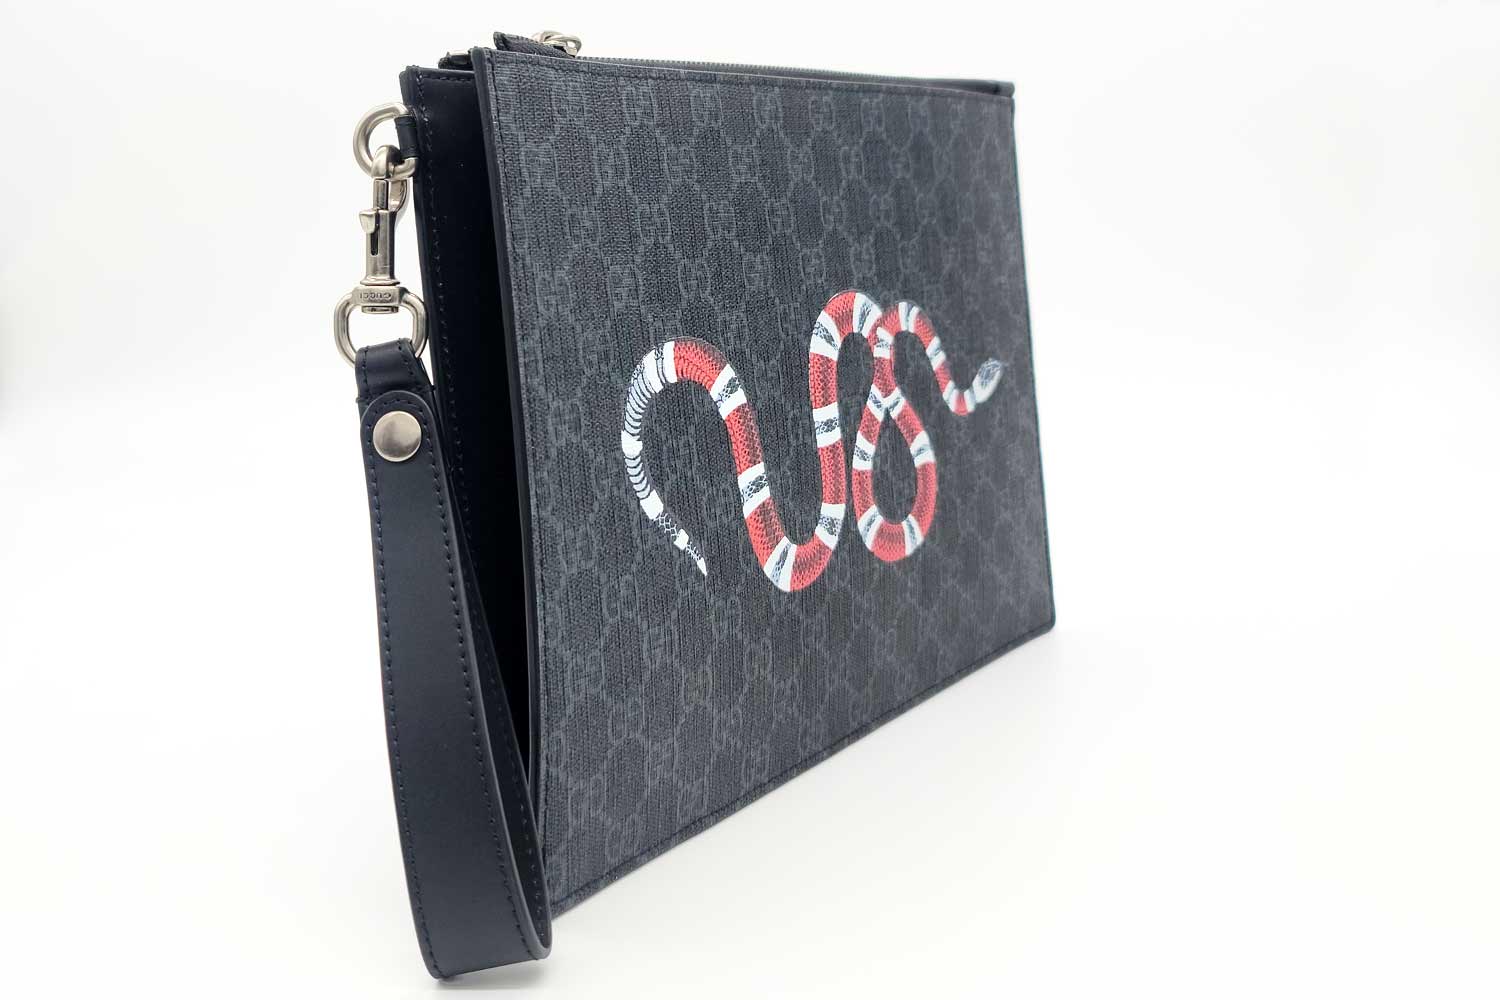 Lexzington - Home Of Prestigious Finds - GUCCI Bestiary Pouch with Kingsnake Design